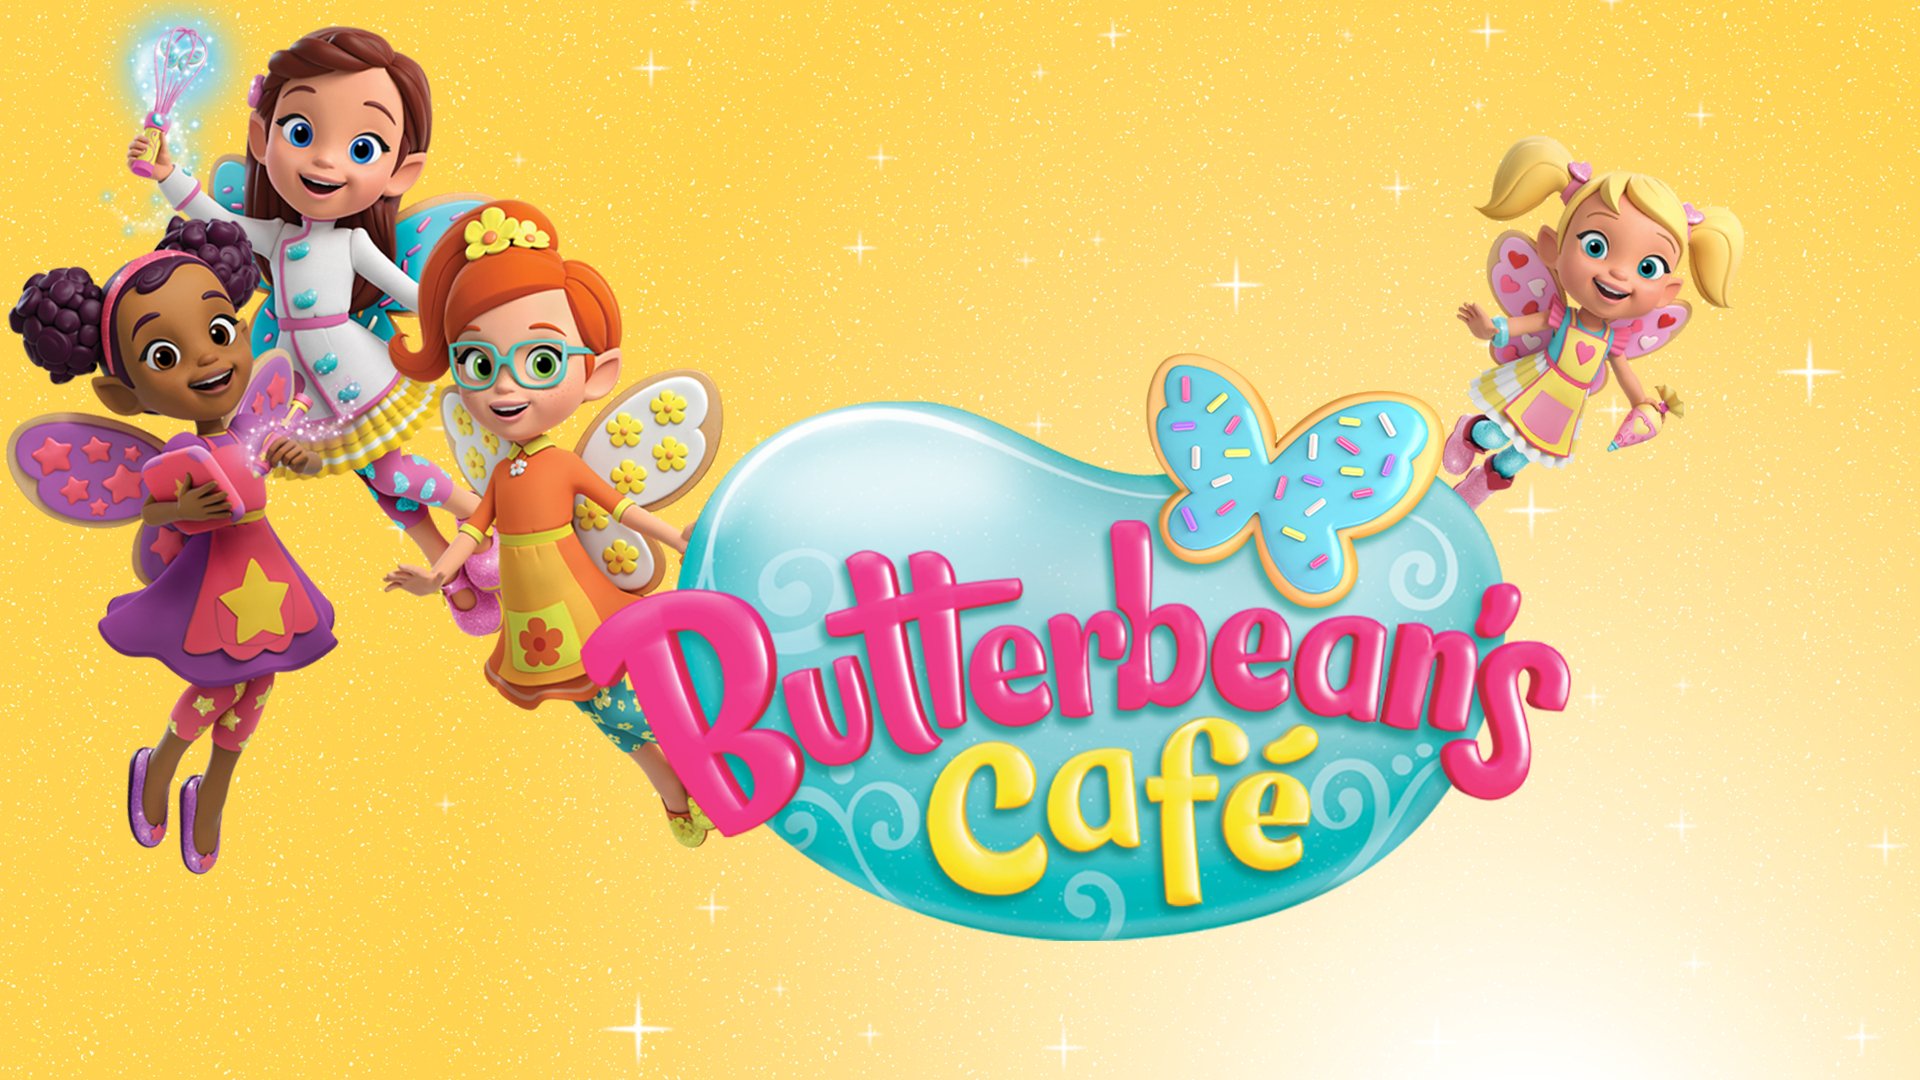 Butterbean cafe streaming